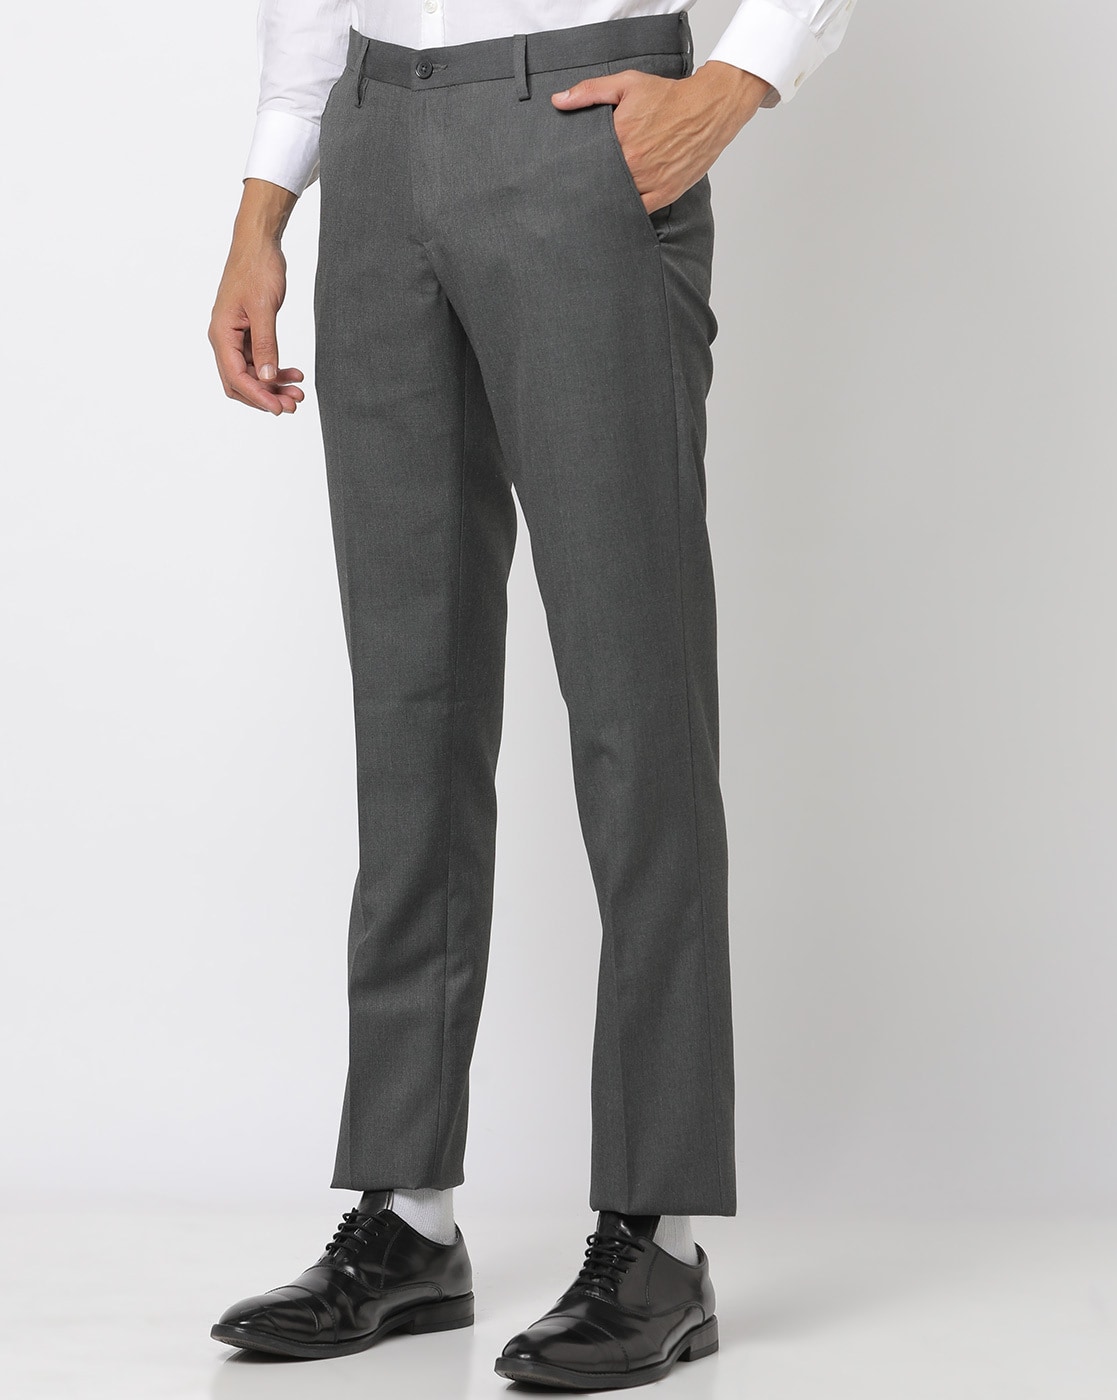 Flannel Trousers - Charcoal